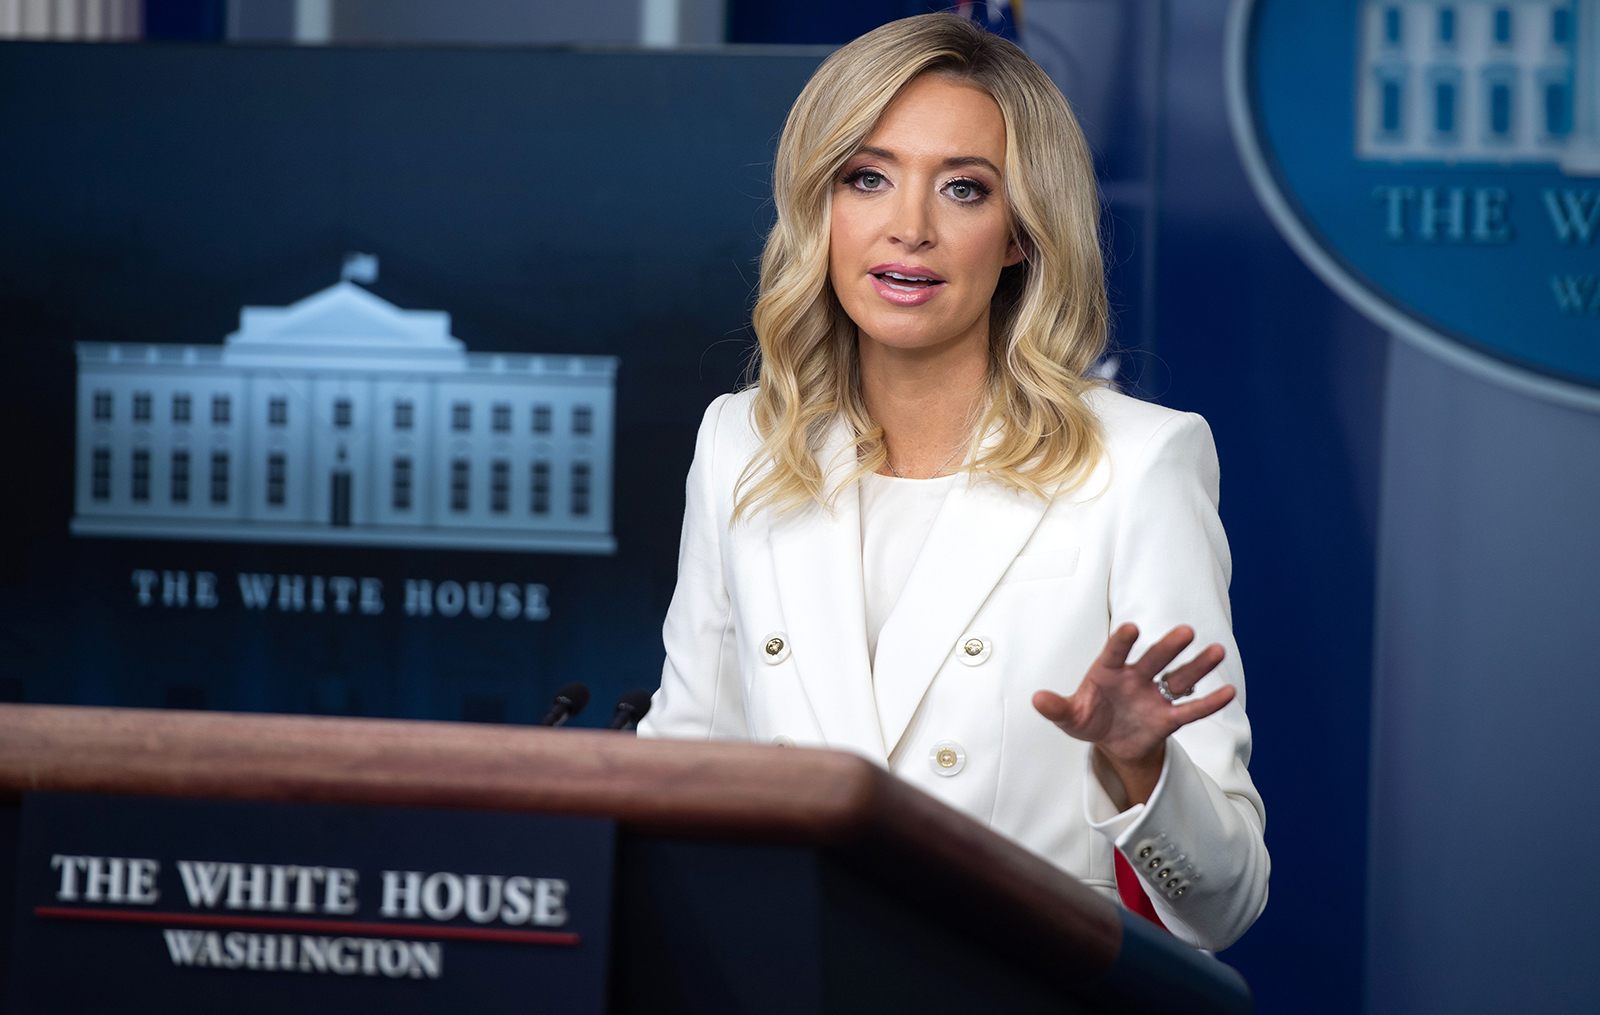 White House Press Secretary Kayleigh McEnany speaks during a White House Press Briefing on Wednesday, May 6.